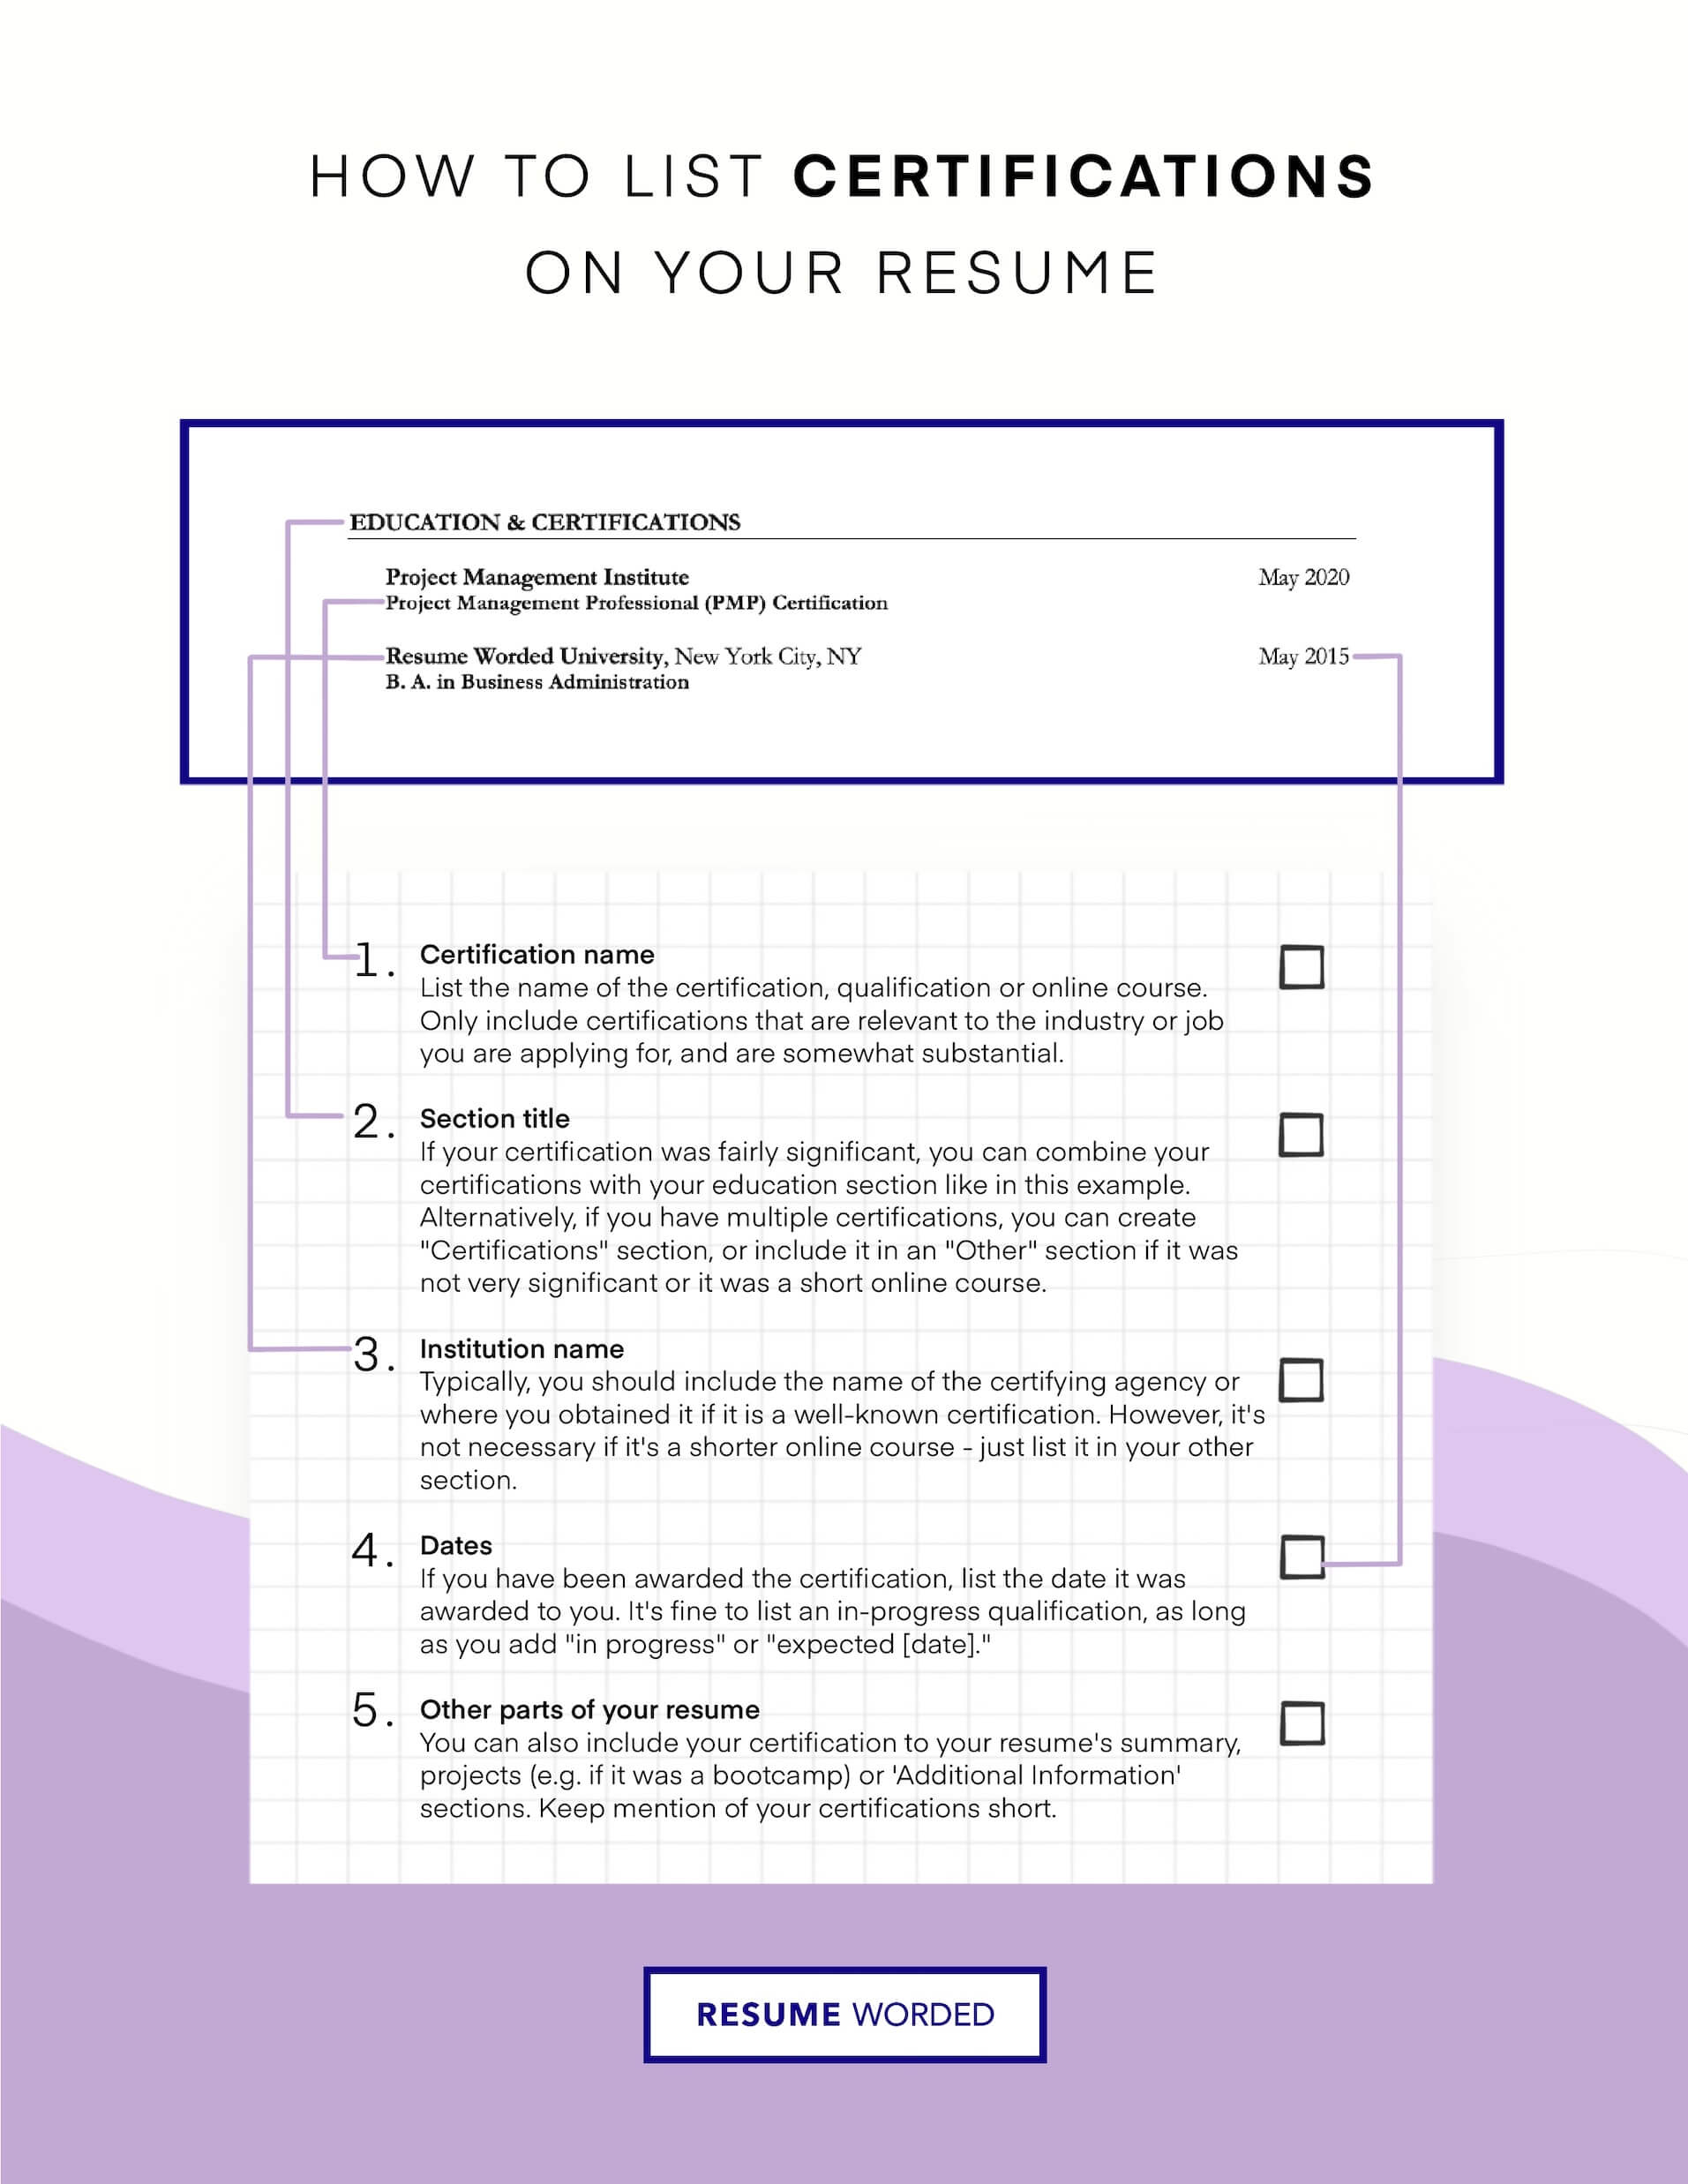 Include any relevant analysis certification. - Reporting Analyst Resume